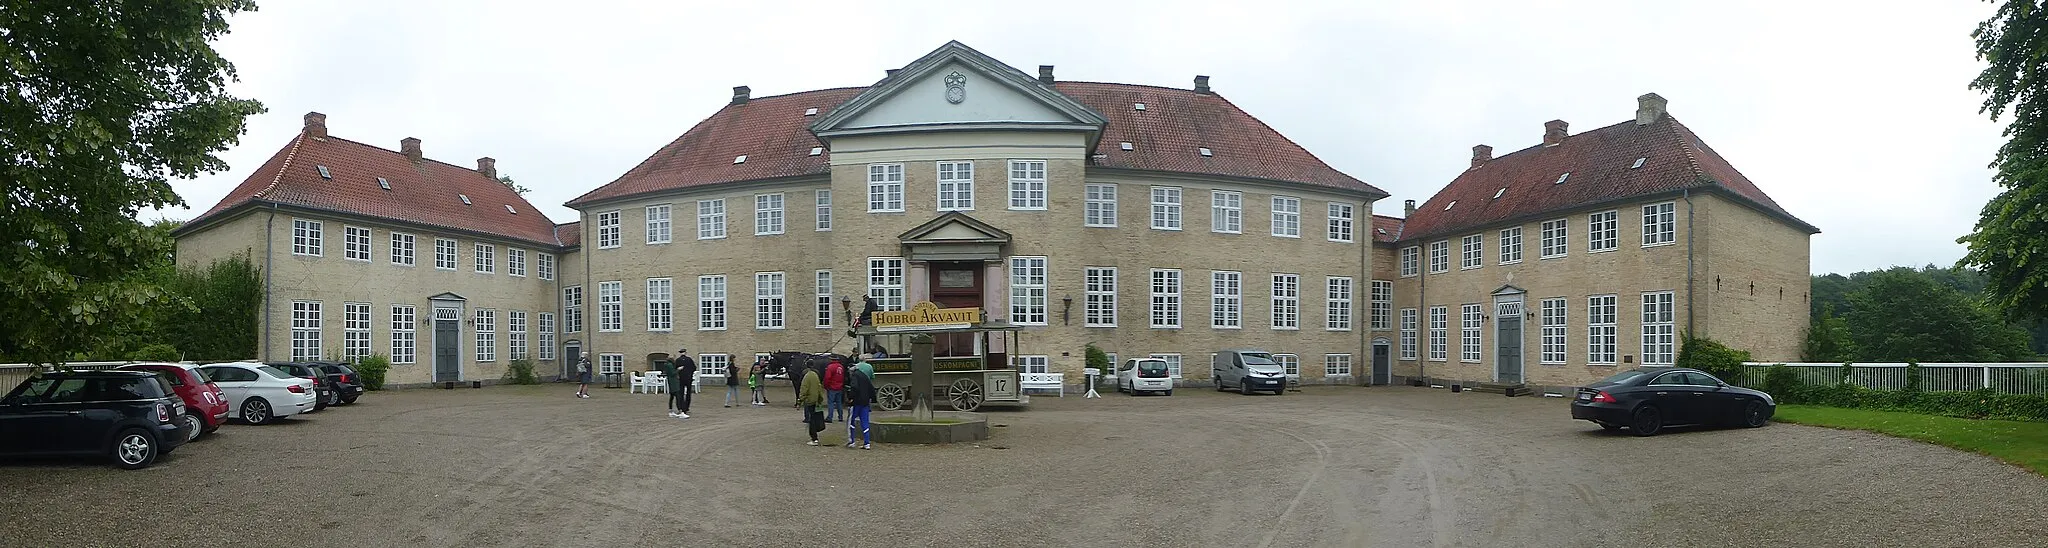 Photo showing: The horse-drawn bus KO 17 from 1897 from Copenhagen at the main building of the estate Skjoldenæsholm. The bus belongs to Sporvejsmuseet Skjoldenæsholm which provides trips with it to the estate and back on certain days.